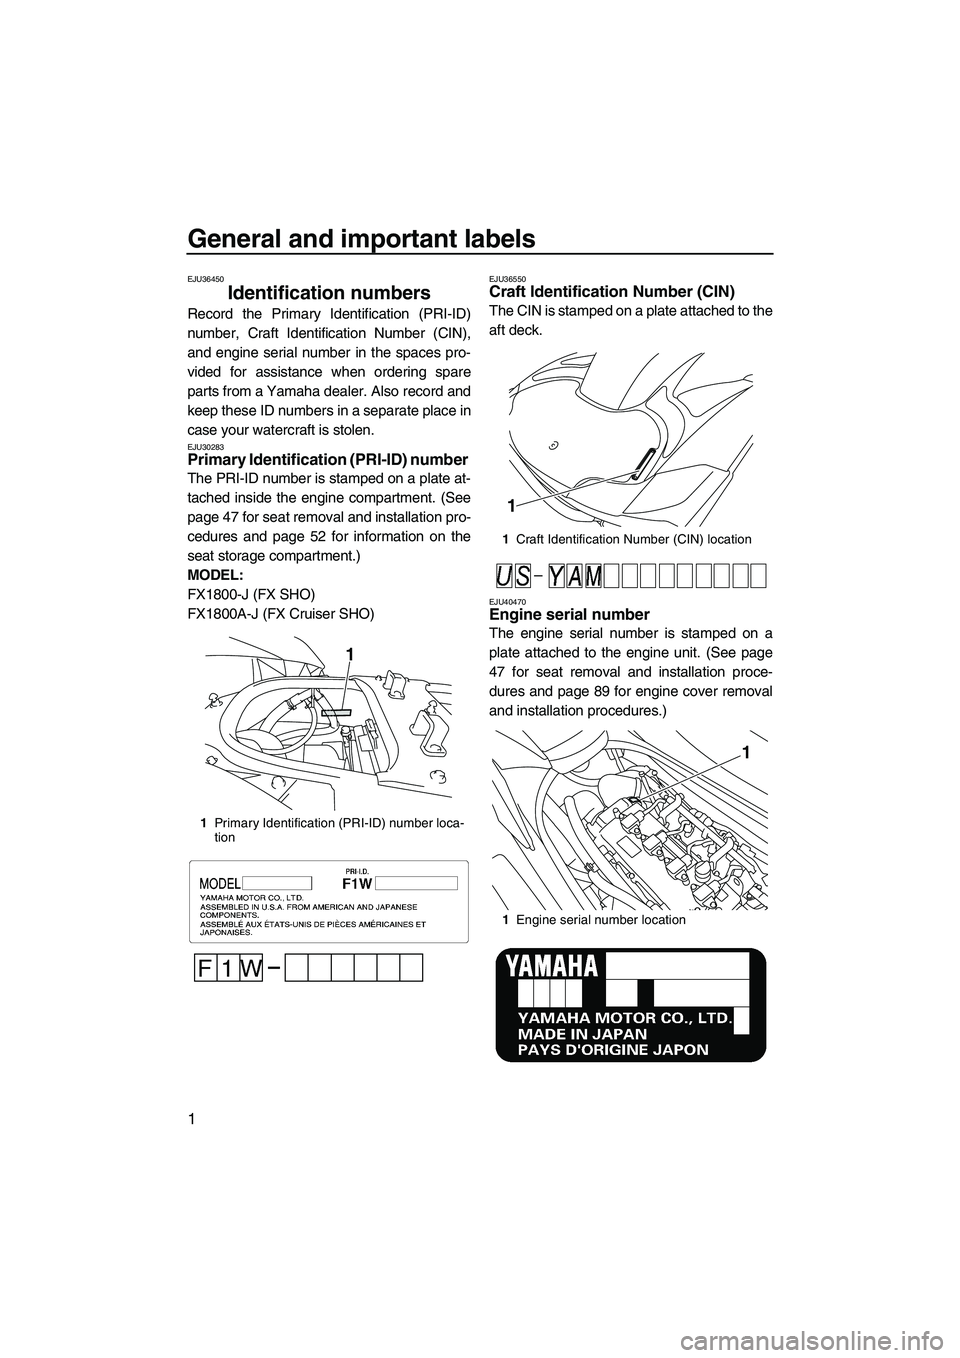 YAMAHA FX SHO 2010  Owners Manual General and important labels
1
EJU36450
Identification numbers 
Record the Primary Identification (PRI-ID)
number, Craft Identification Number (CIN),
and engine serial number in the spaces pro-
vided 